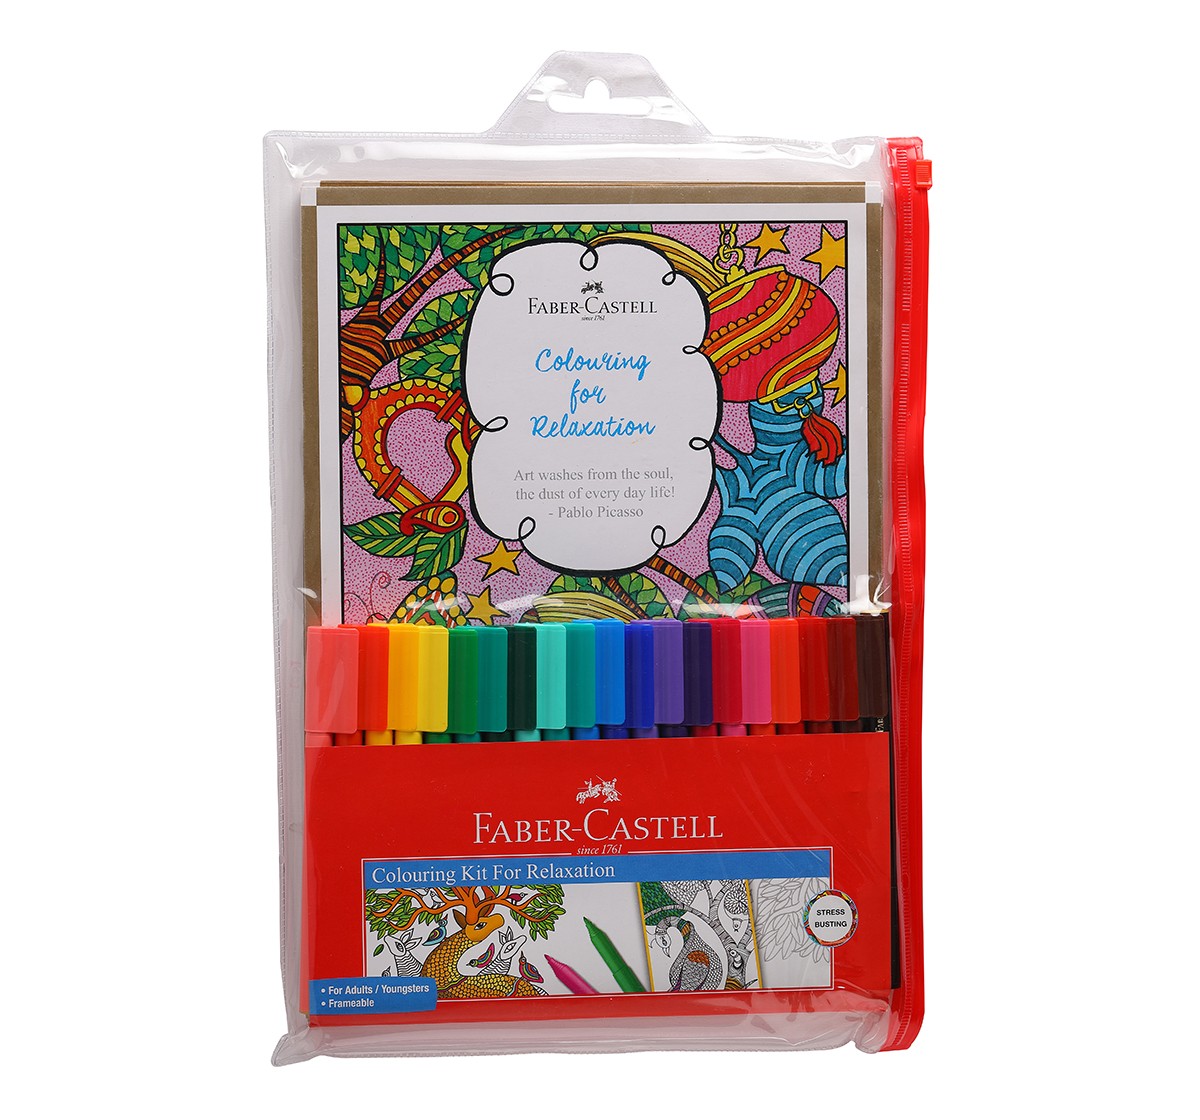 Faber-Castell 55715 colouring kit for relaxation, 7Y+